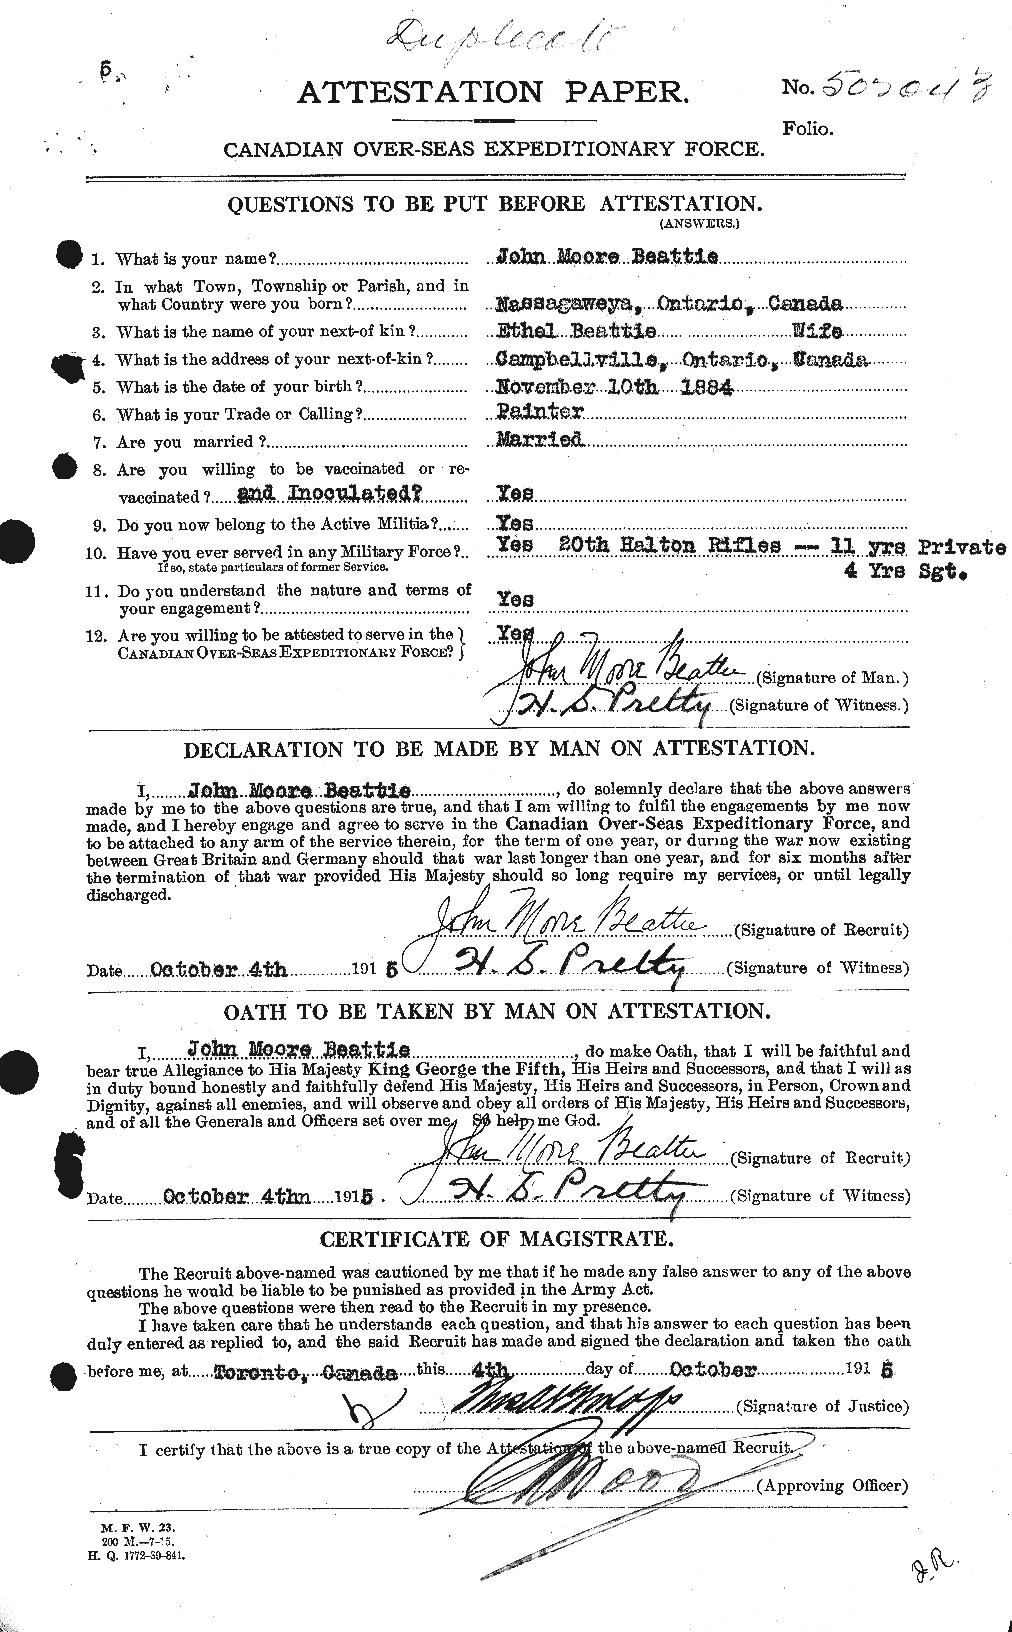 Personnel Records of the First World War - CEF 230755a